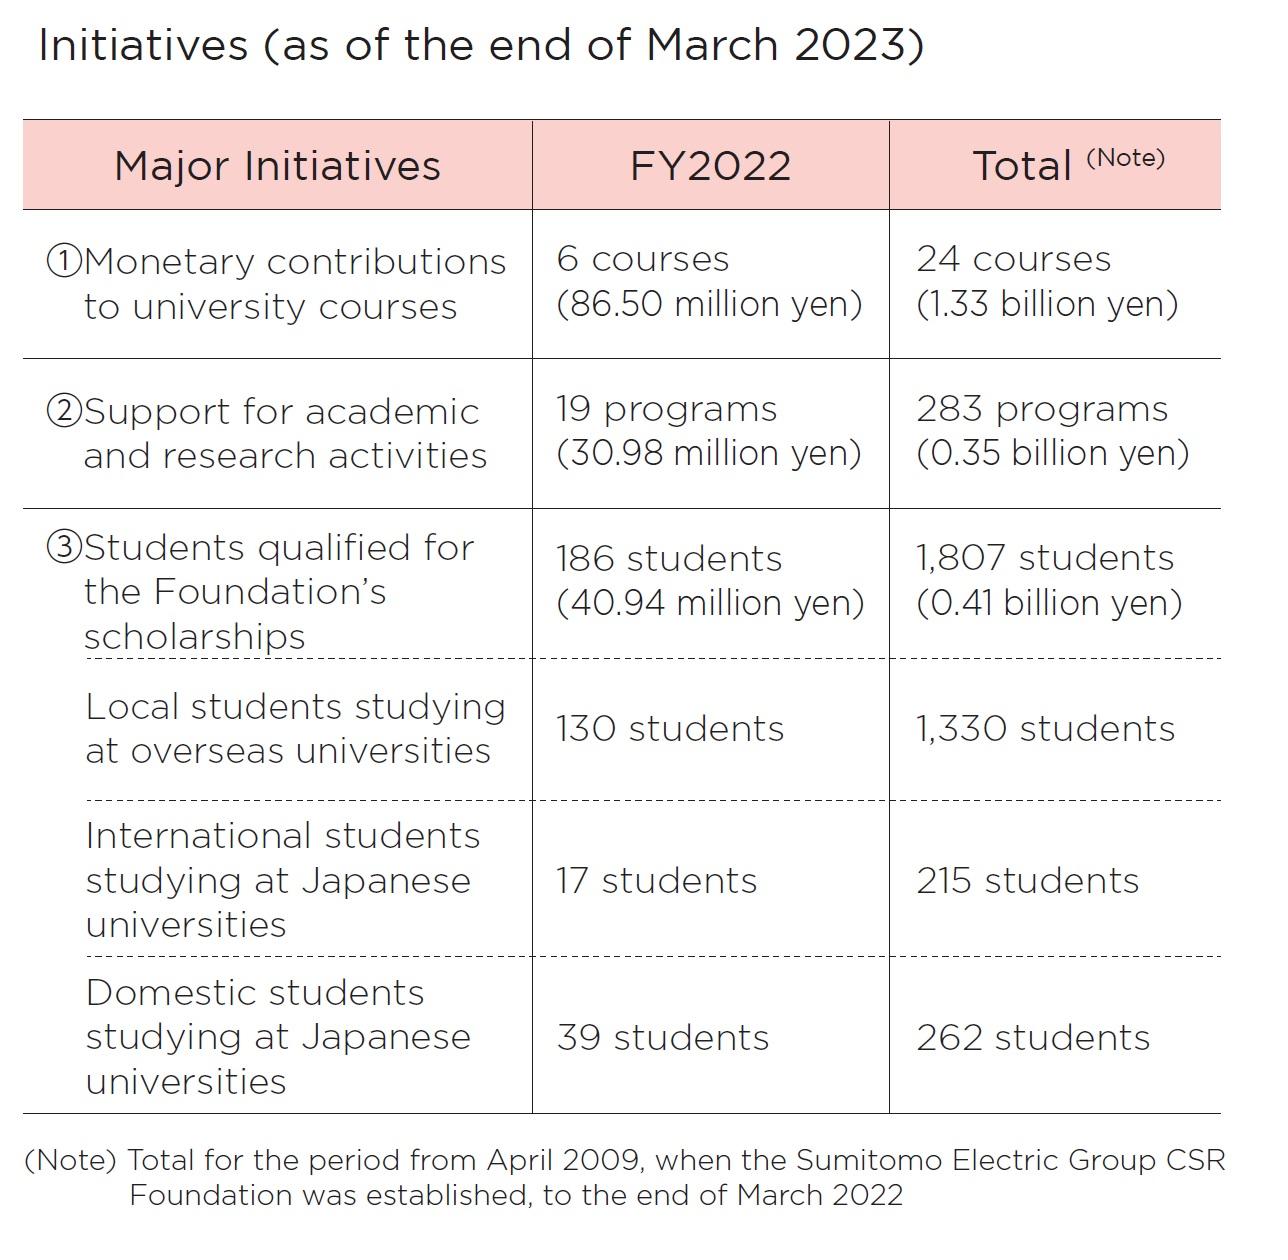 Initiatives (as of the end of March 2023)20231225